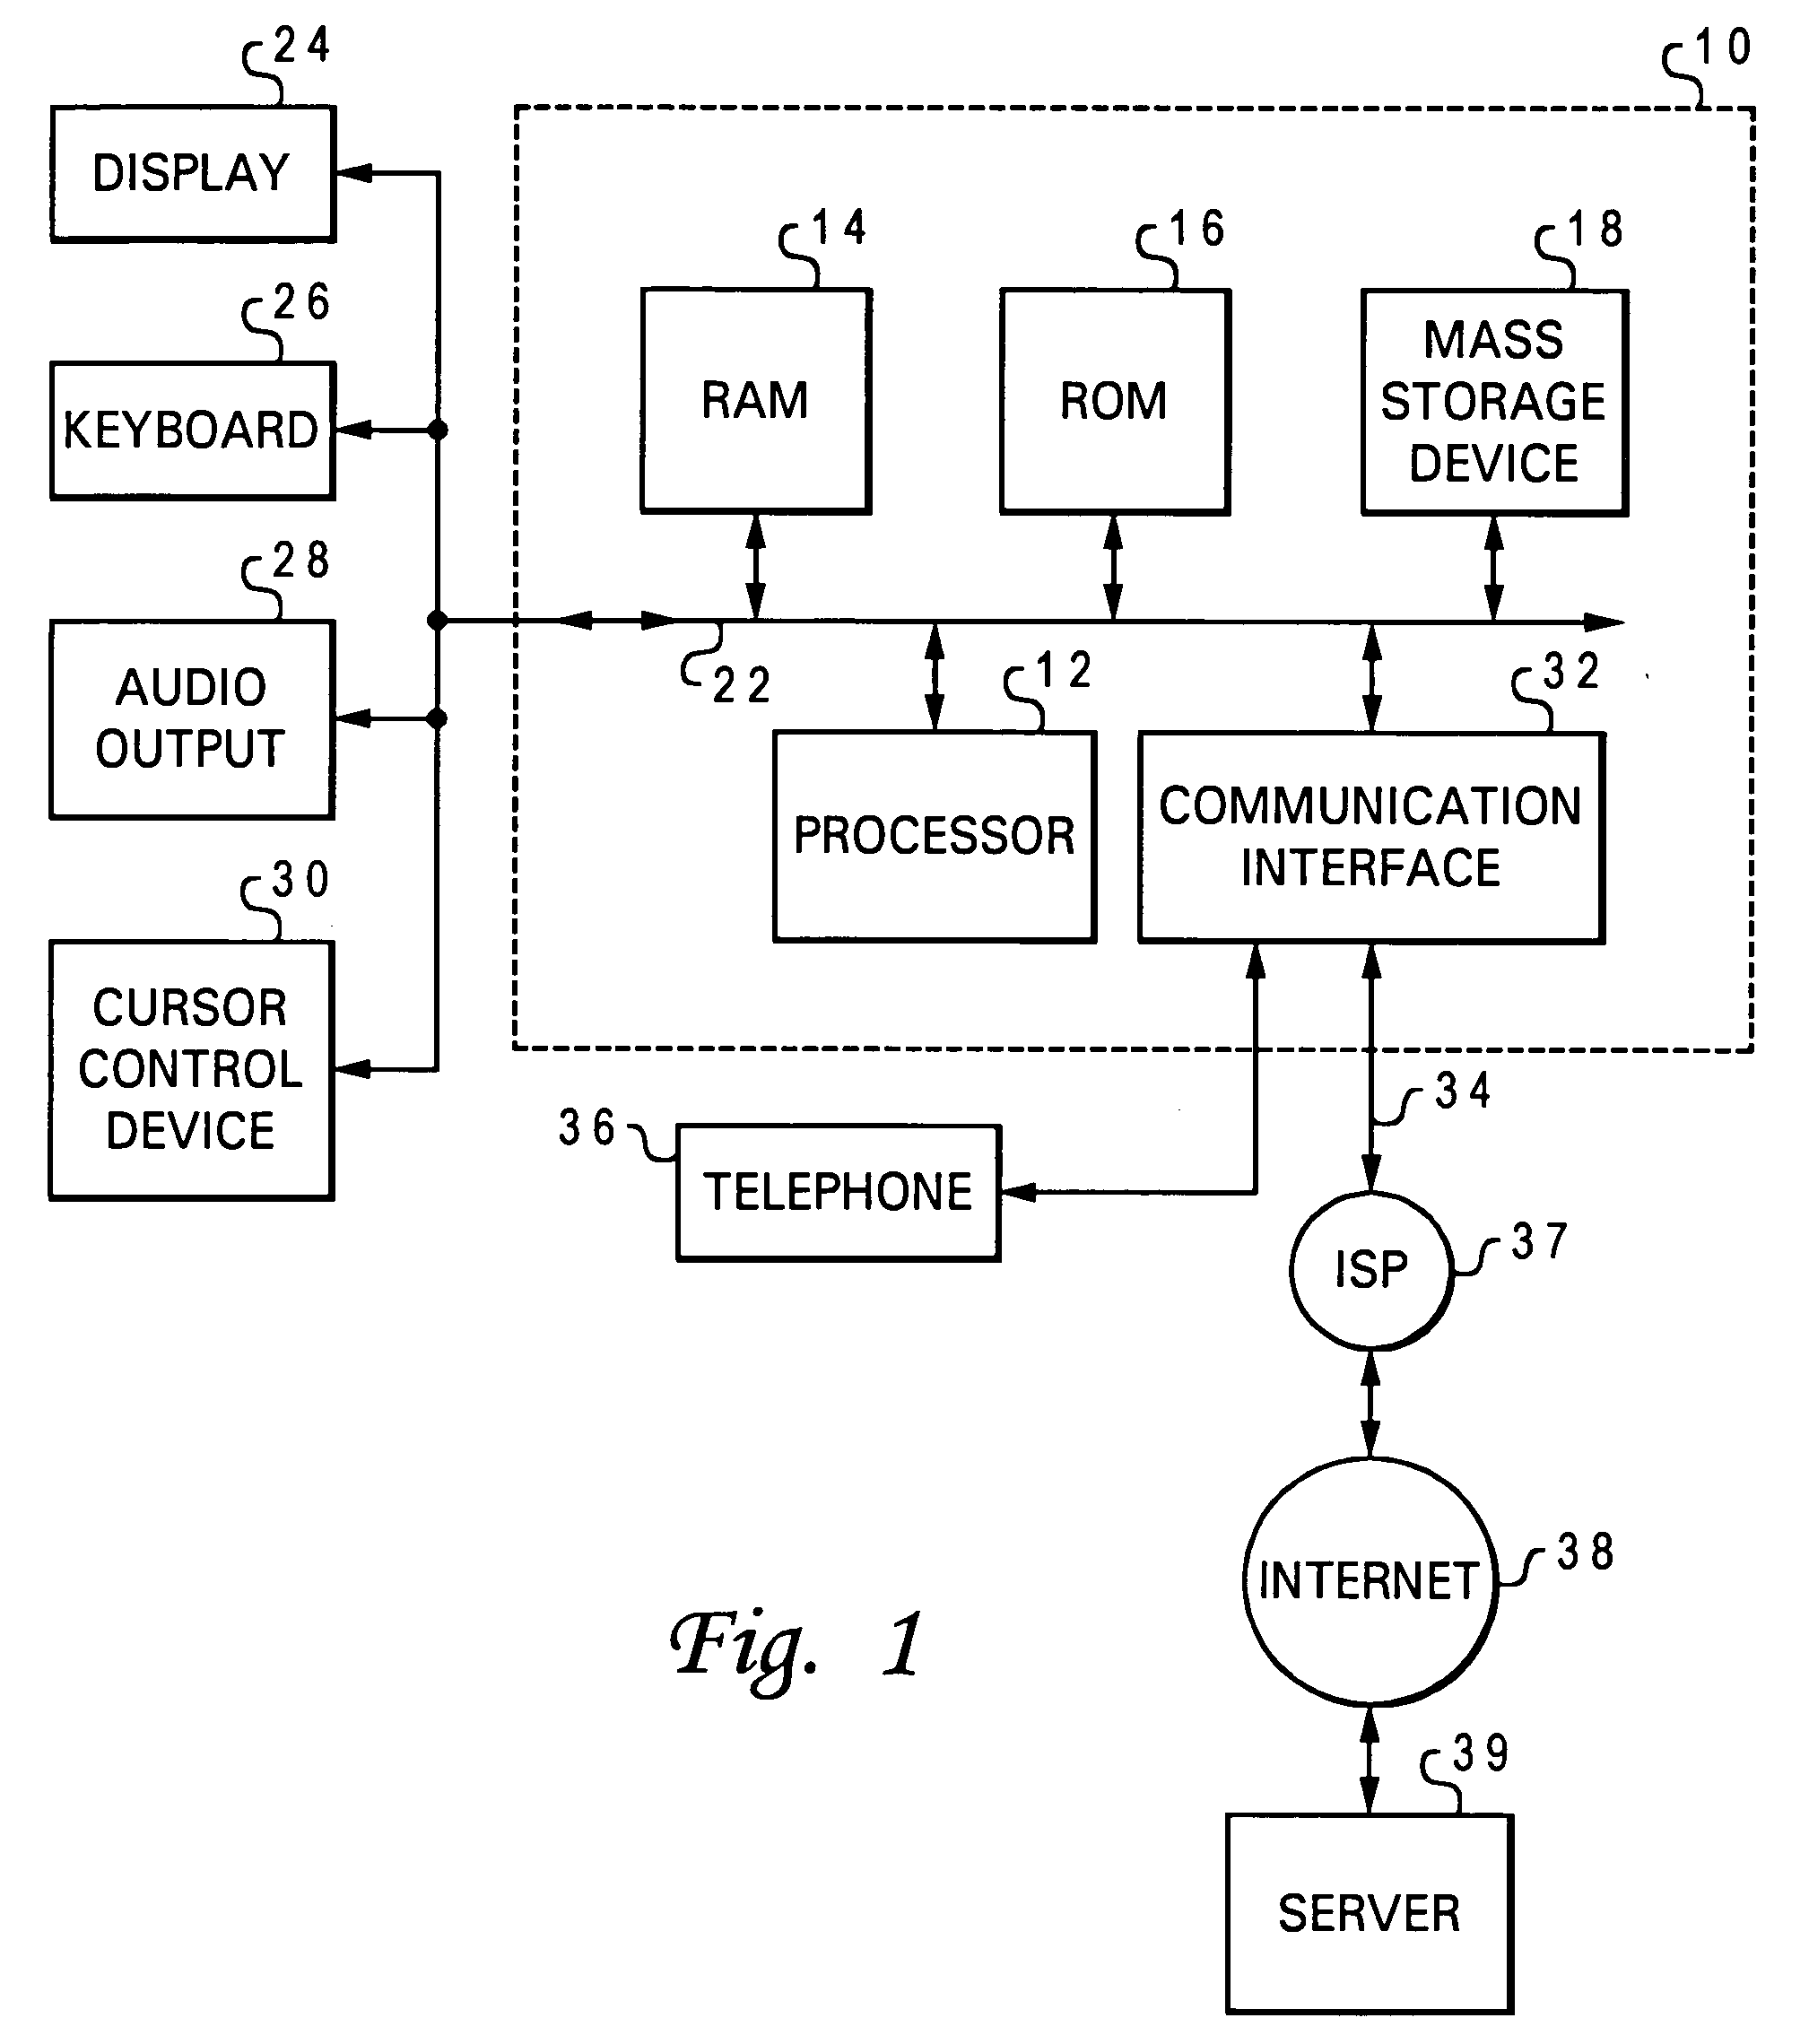 Methods, system and program product for providing automated sender status in a messaging session